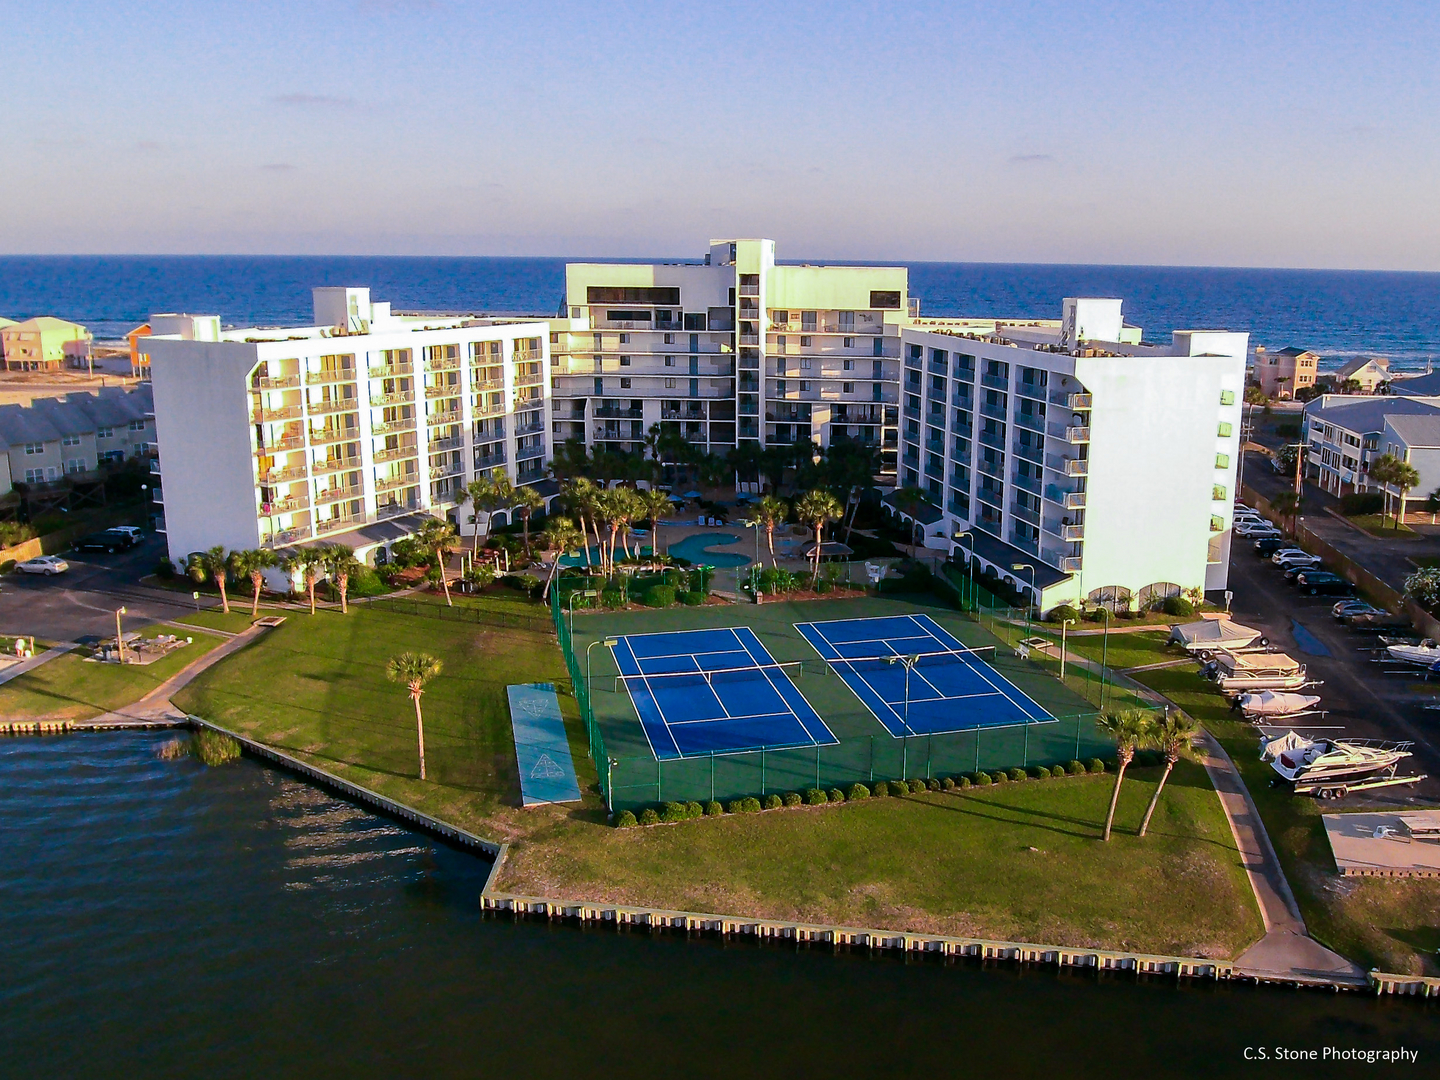 Official Site of Gulf Shores Surf and Racquet Club